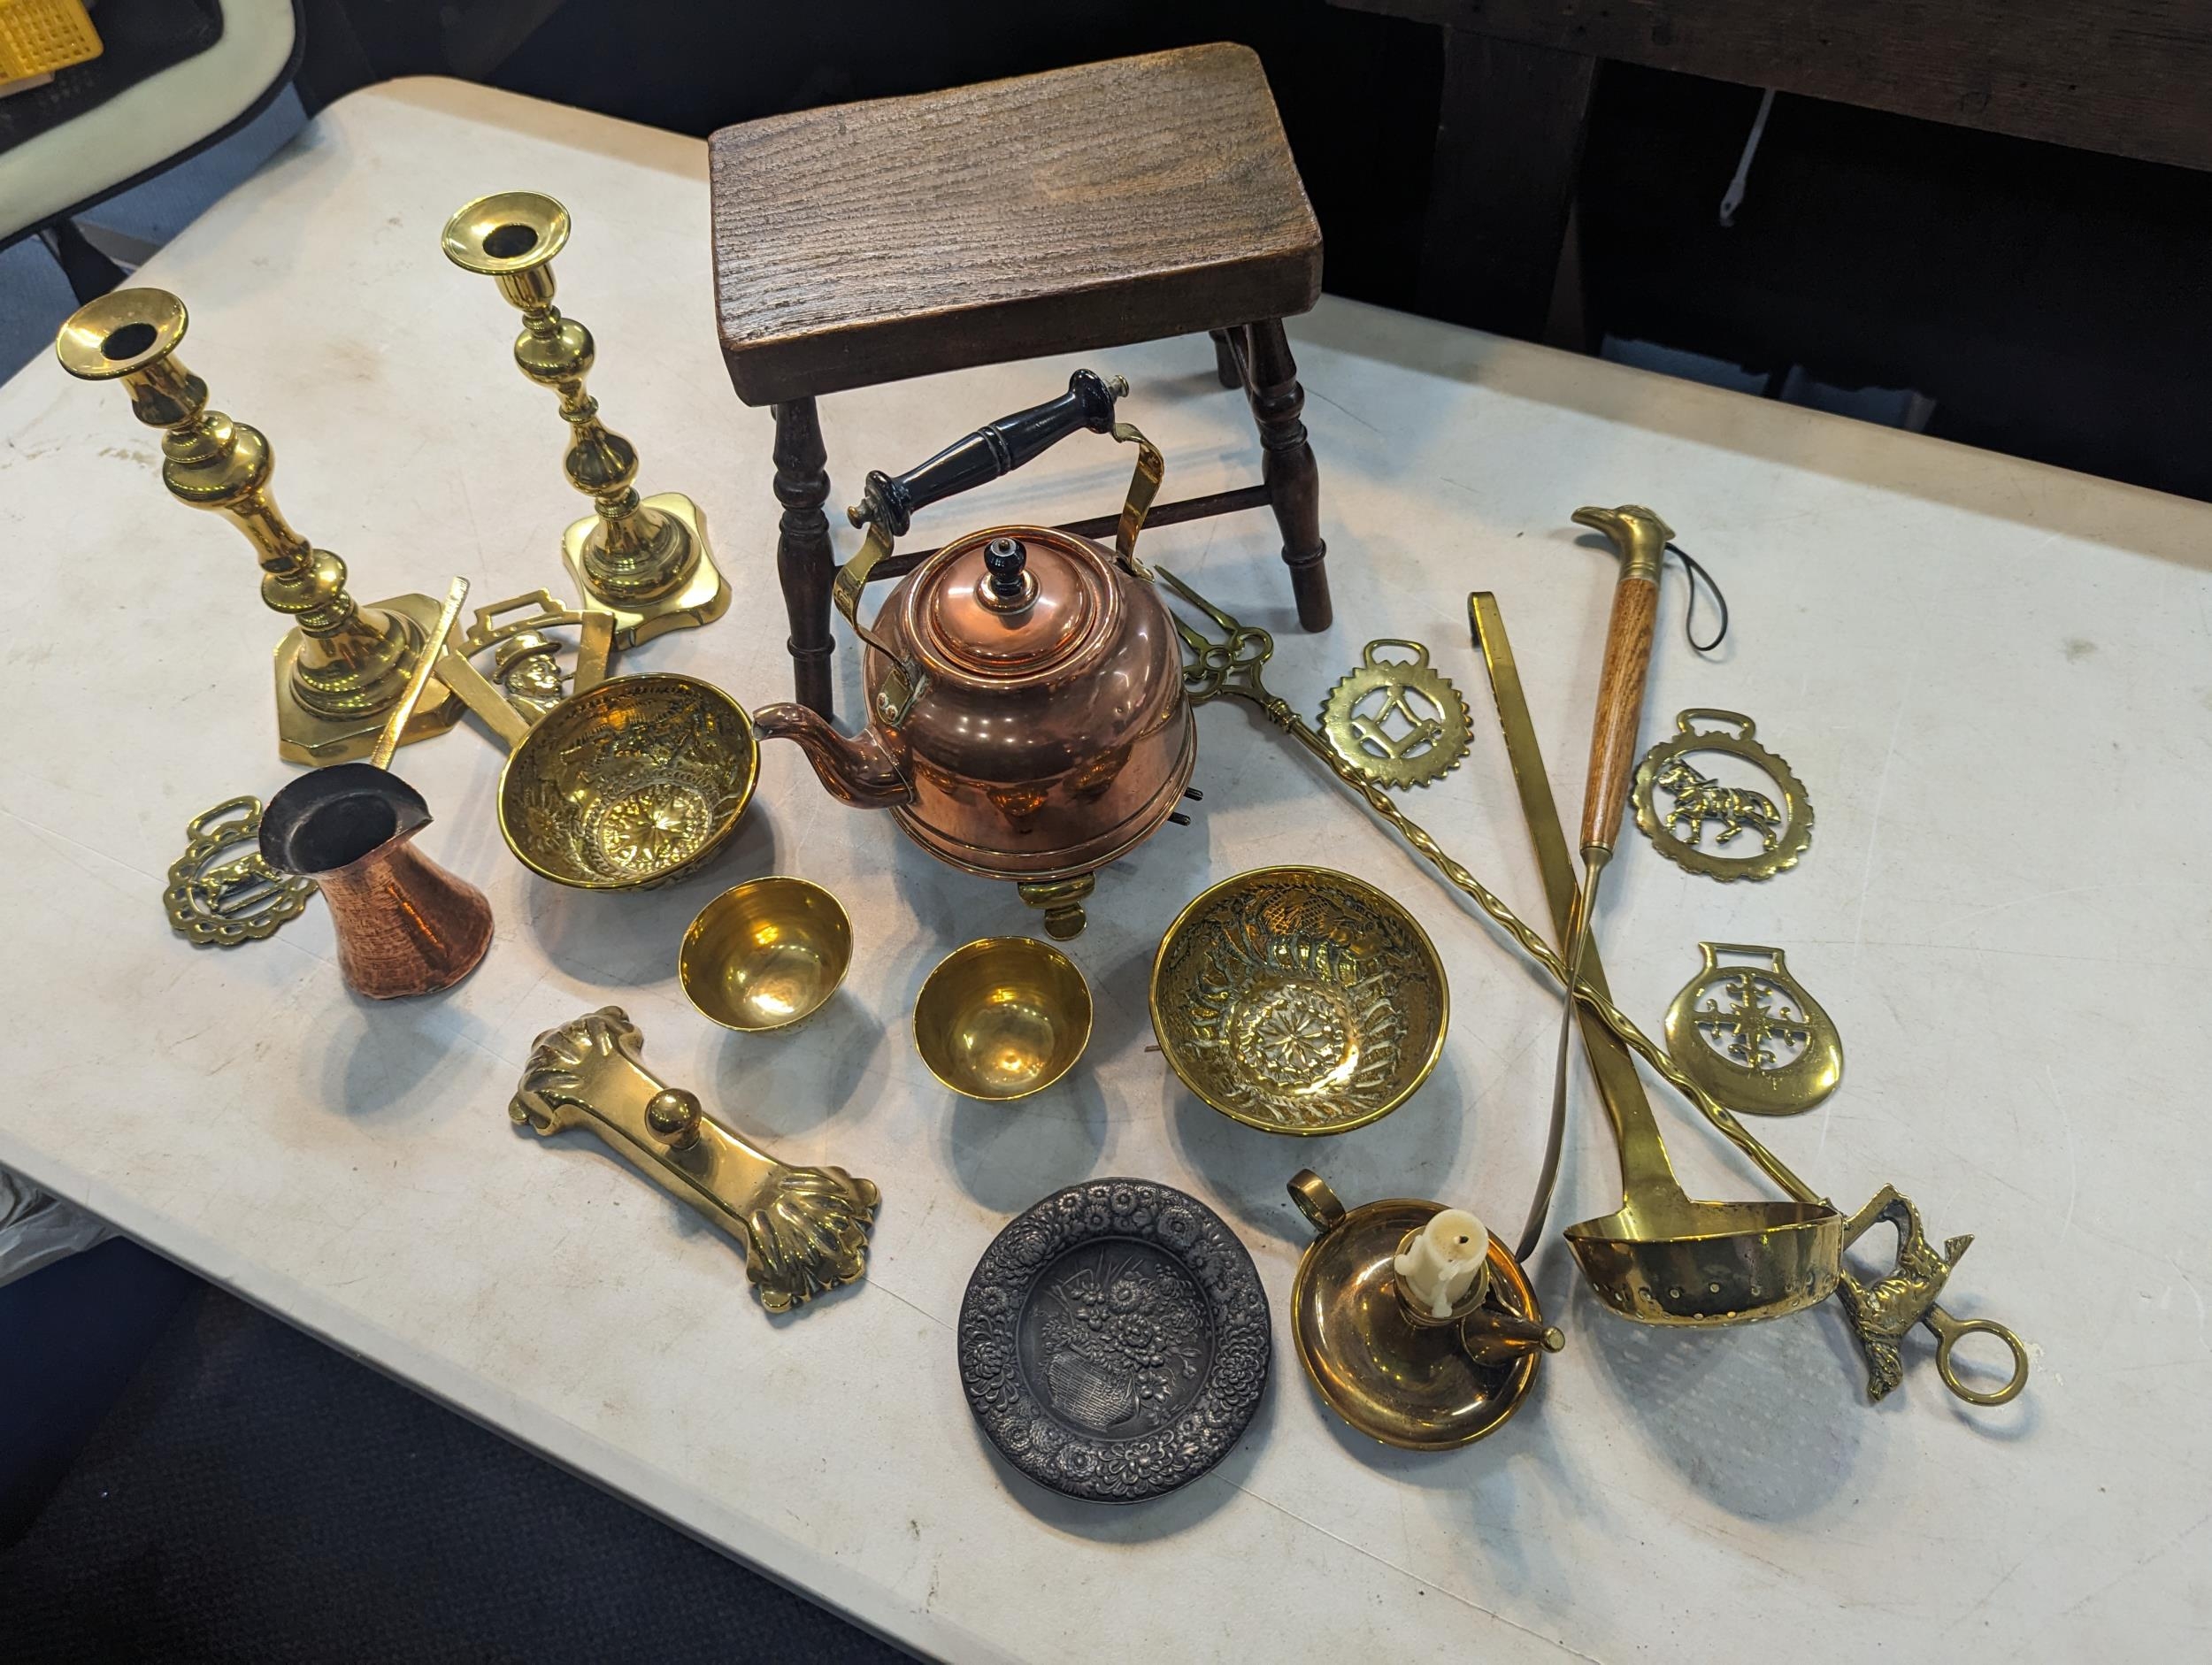 Mixed metalware to include brass candlesticks, copper kettle, fireside implements, along with a